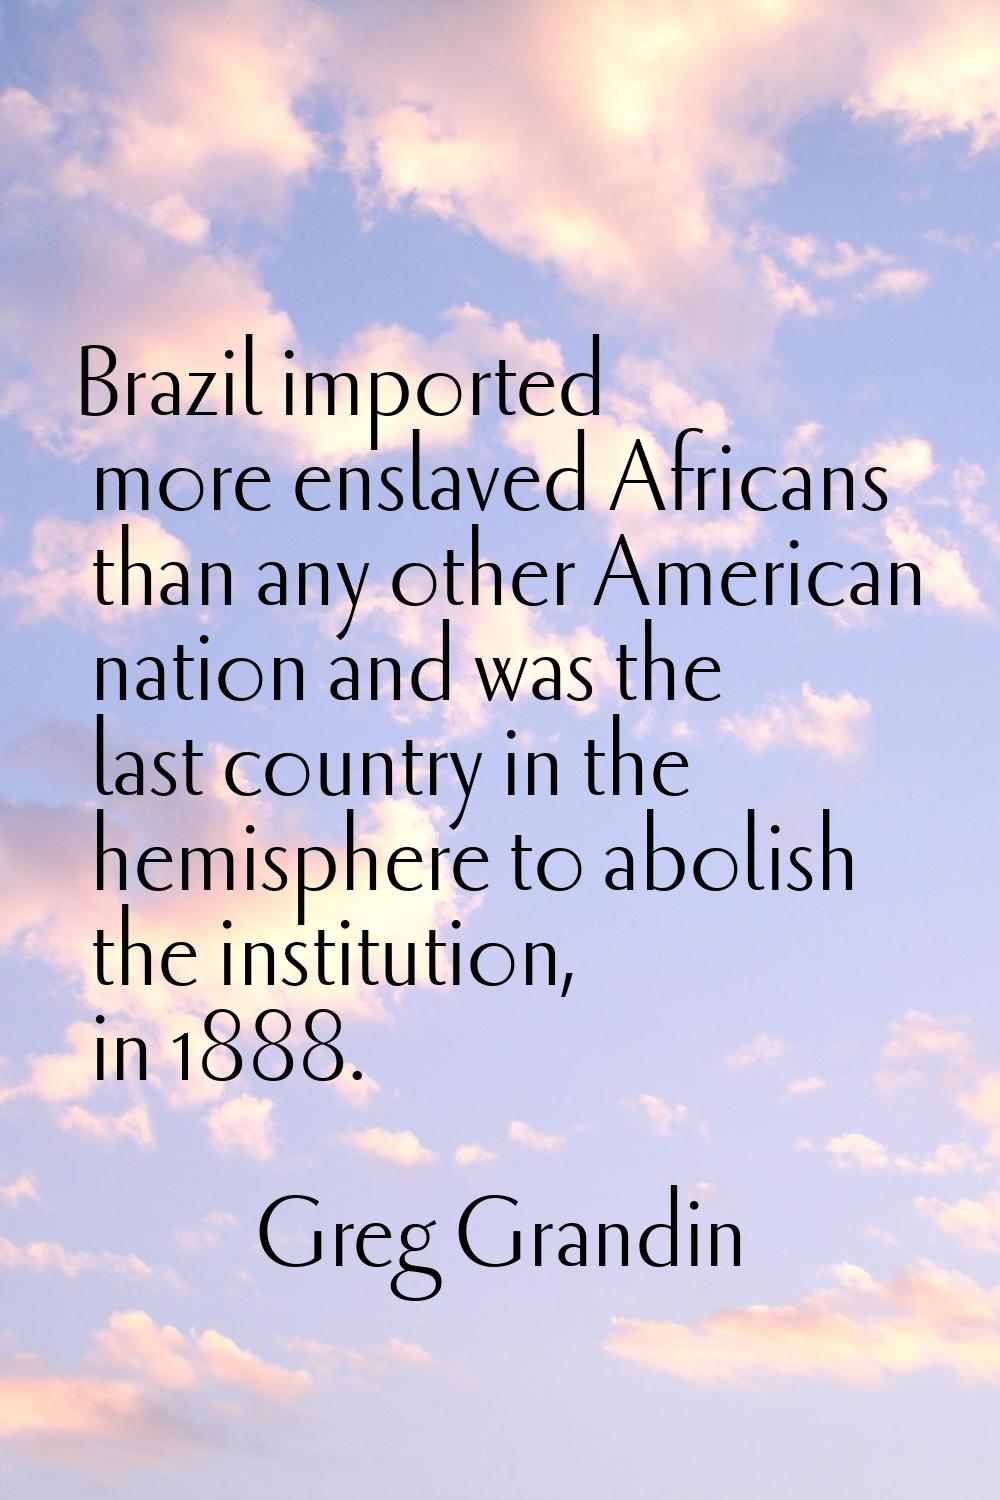 Brazil imported more enslaved Africans than any other American nation and was the last country in t